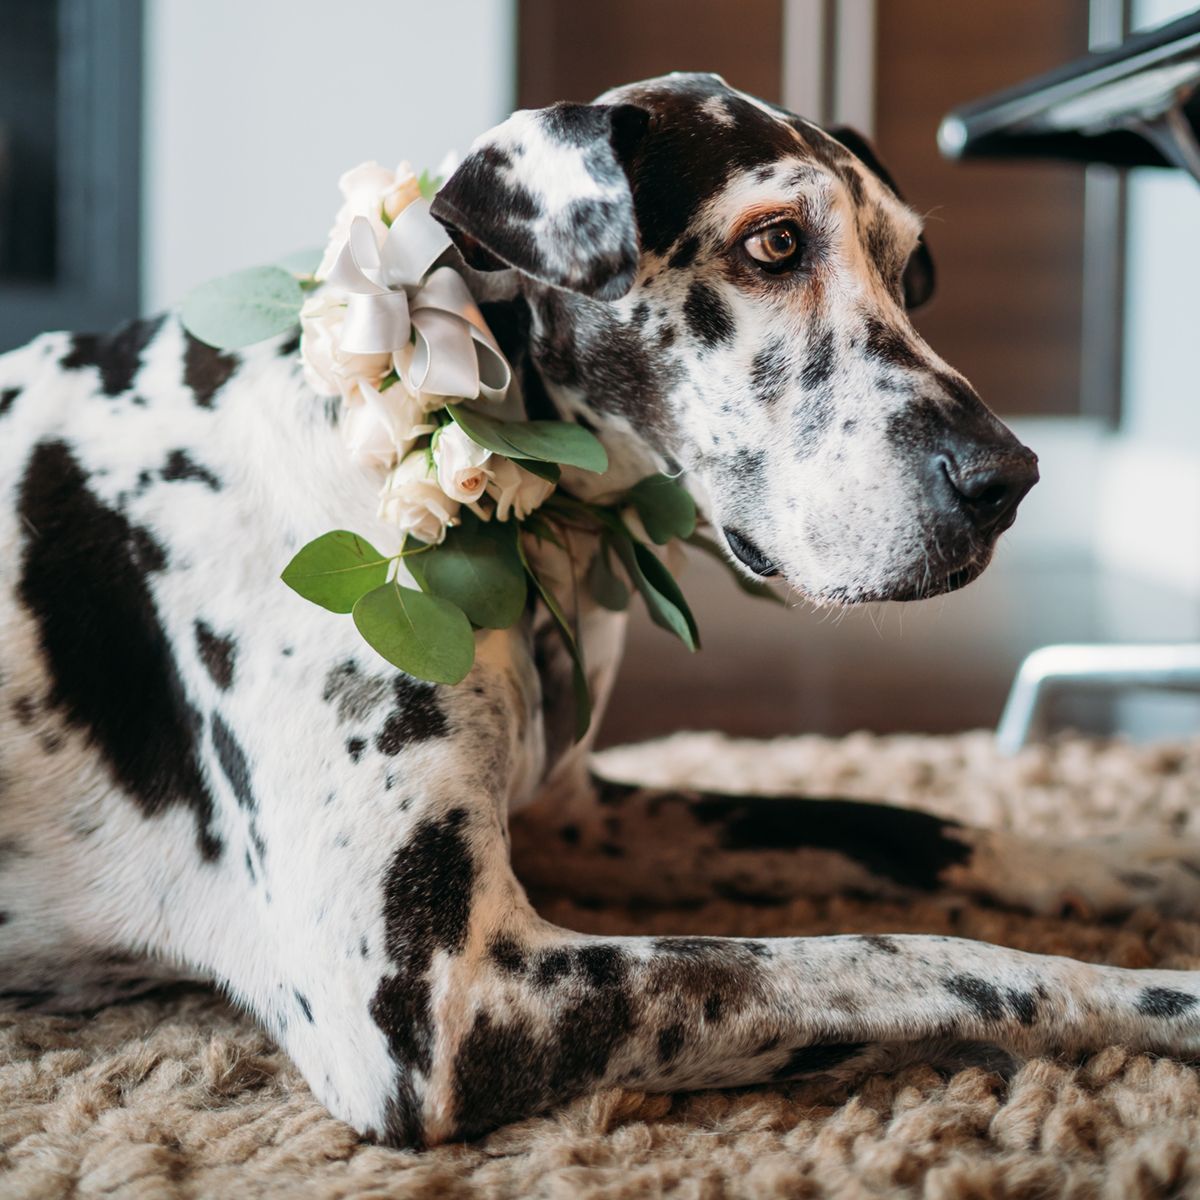 black-and-white great dane with a wedding corsage around its neck